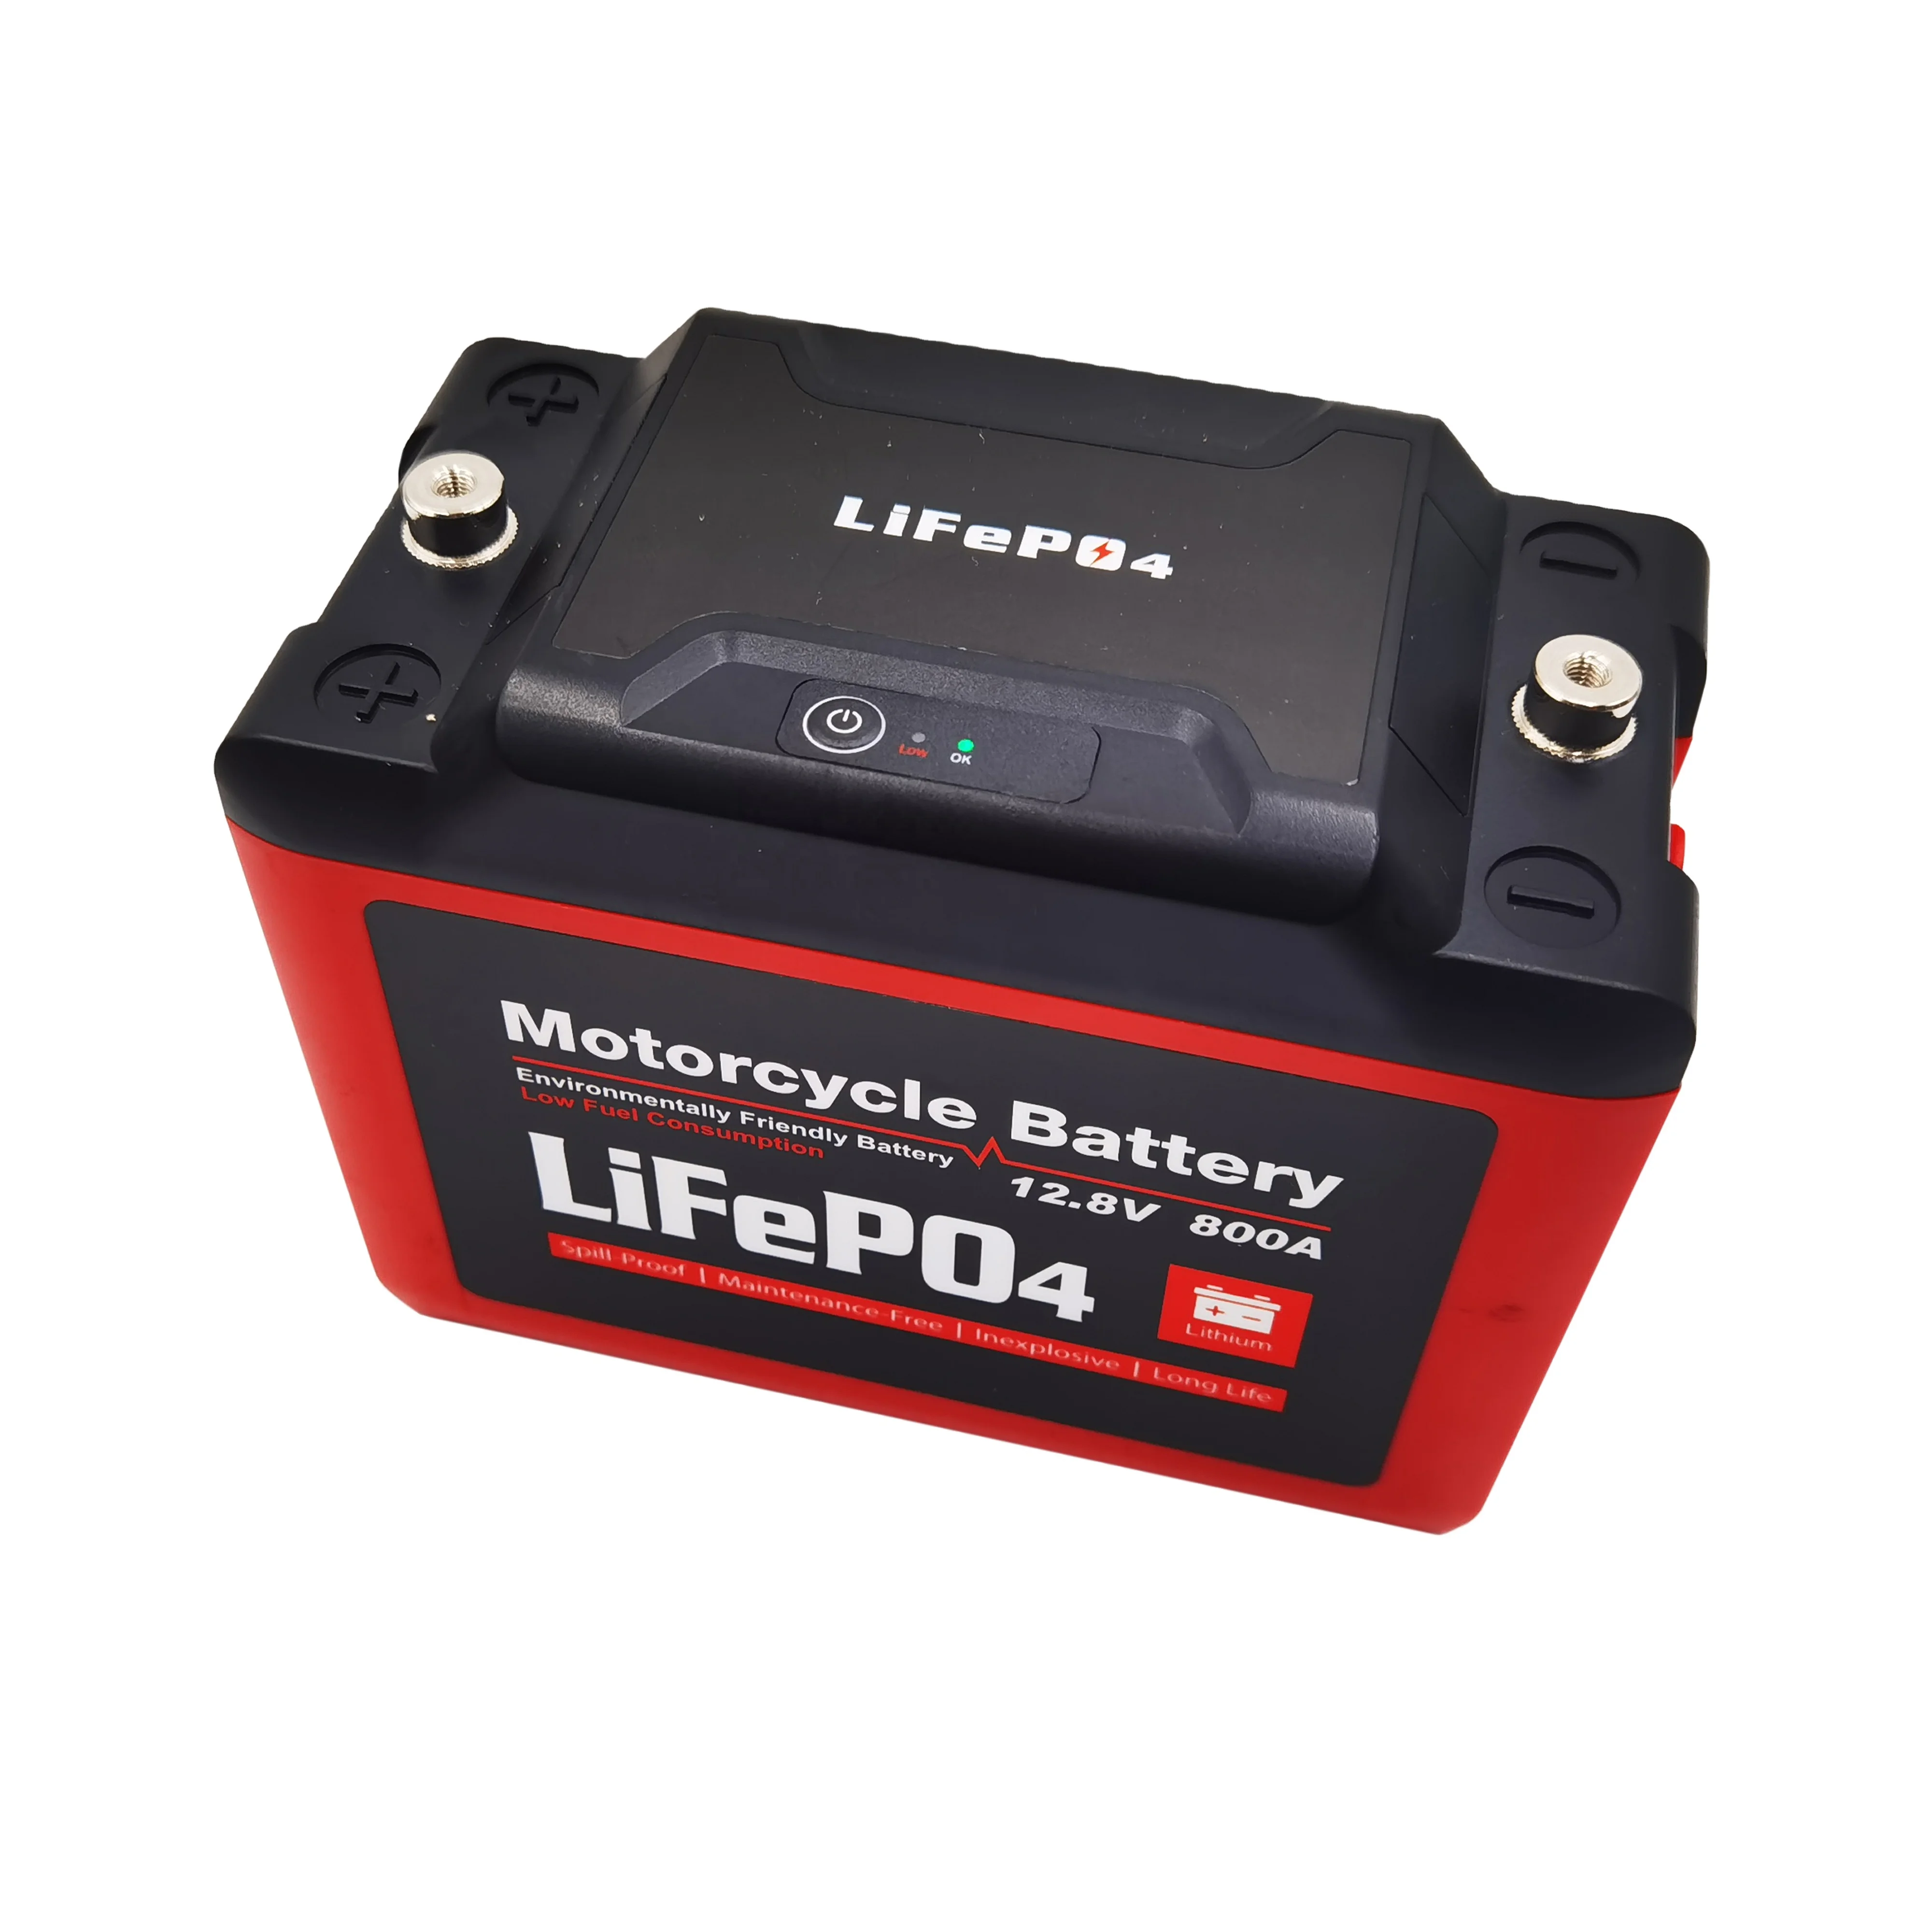 Professional Manufacturer 12.8V 8Ah Lifepo4 Lithium Battery Starter For Motorcycle Rechargeable Batteries